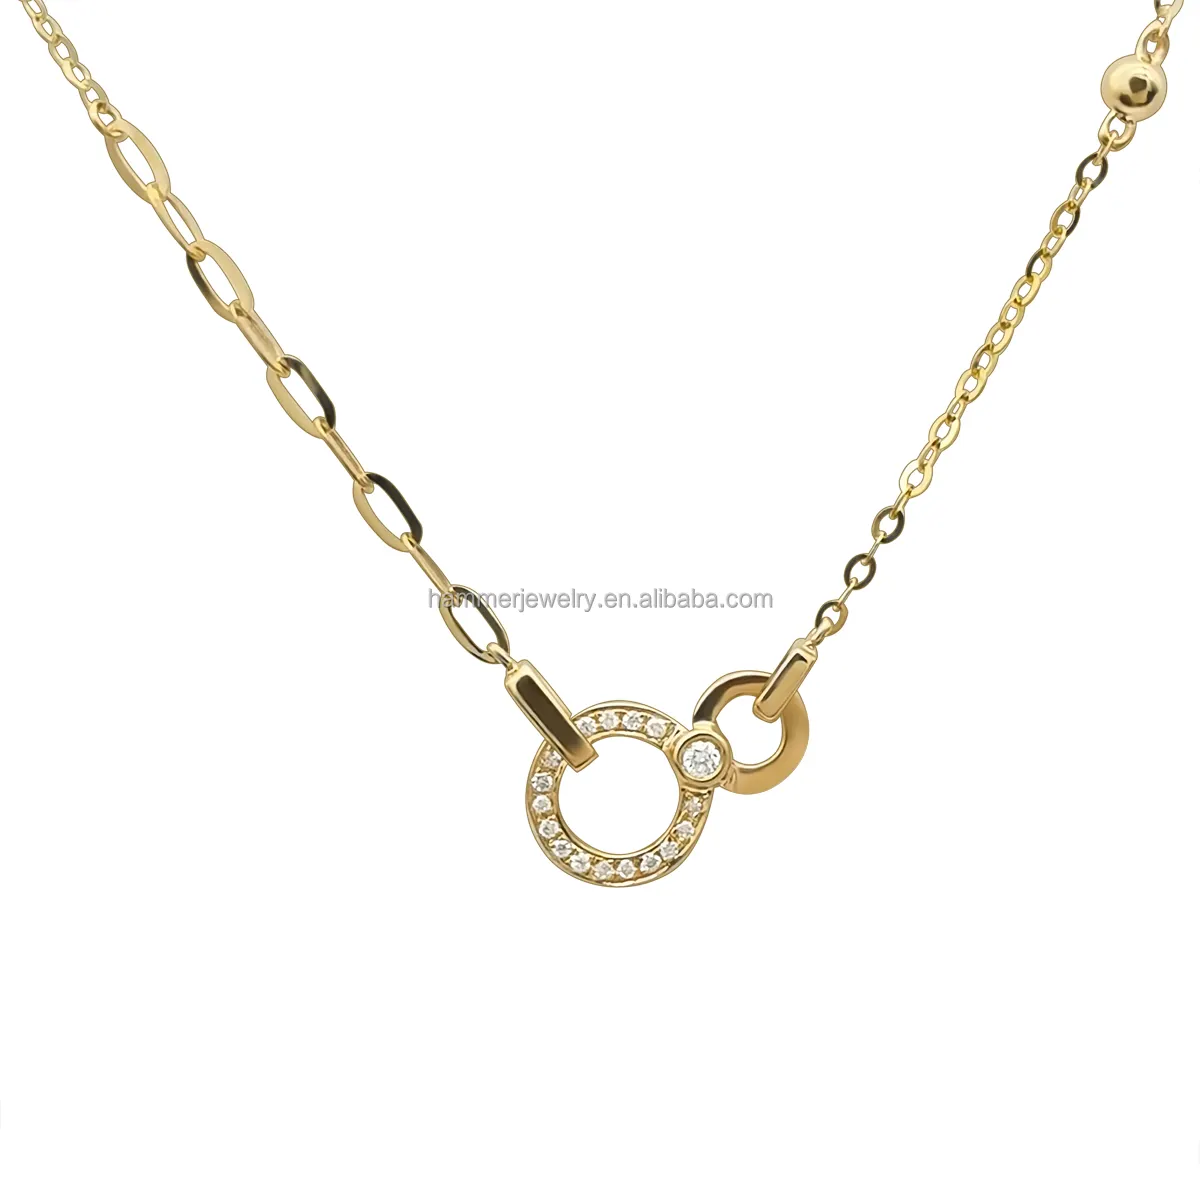 Wholesale 14k AU585 Solid Gold Necklace with Lab-Grown Diamond Eight shape Pendant on Link Chain for Women Jewlery